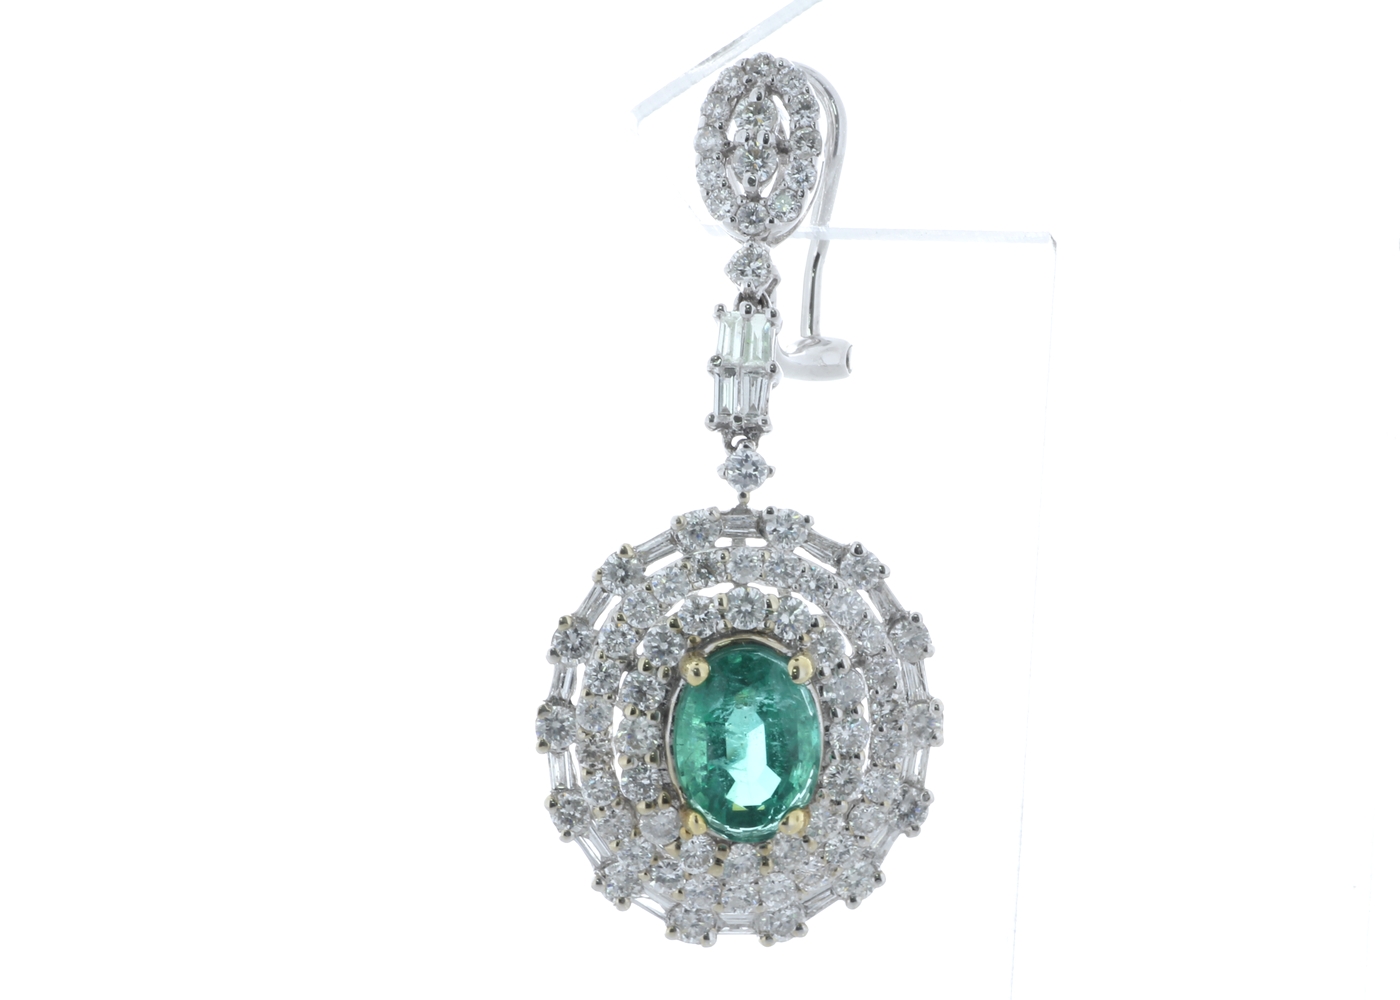 18ct White Gold Diamond And Emerald Drop Earrings (E2.61) 3.74 Carats - Image 4 of 5